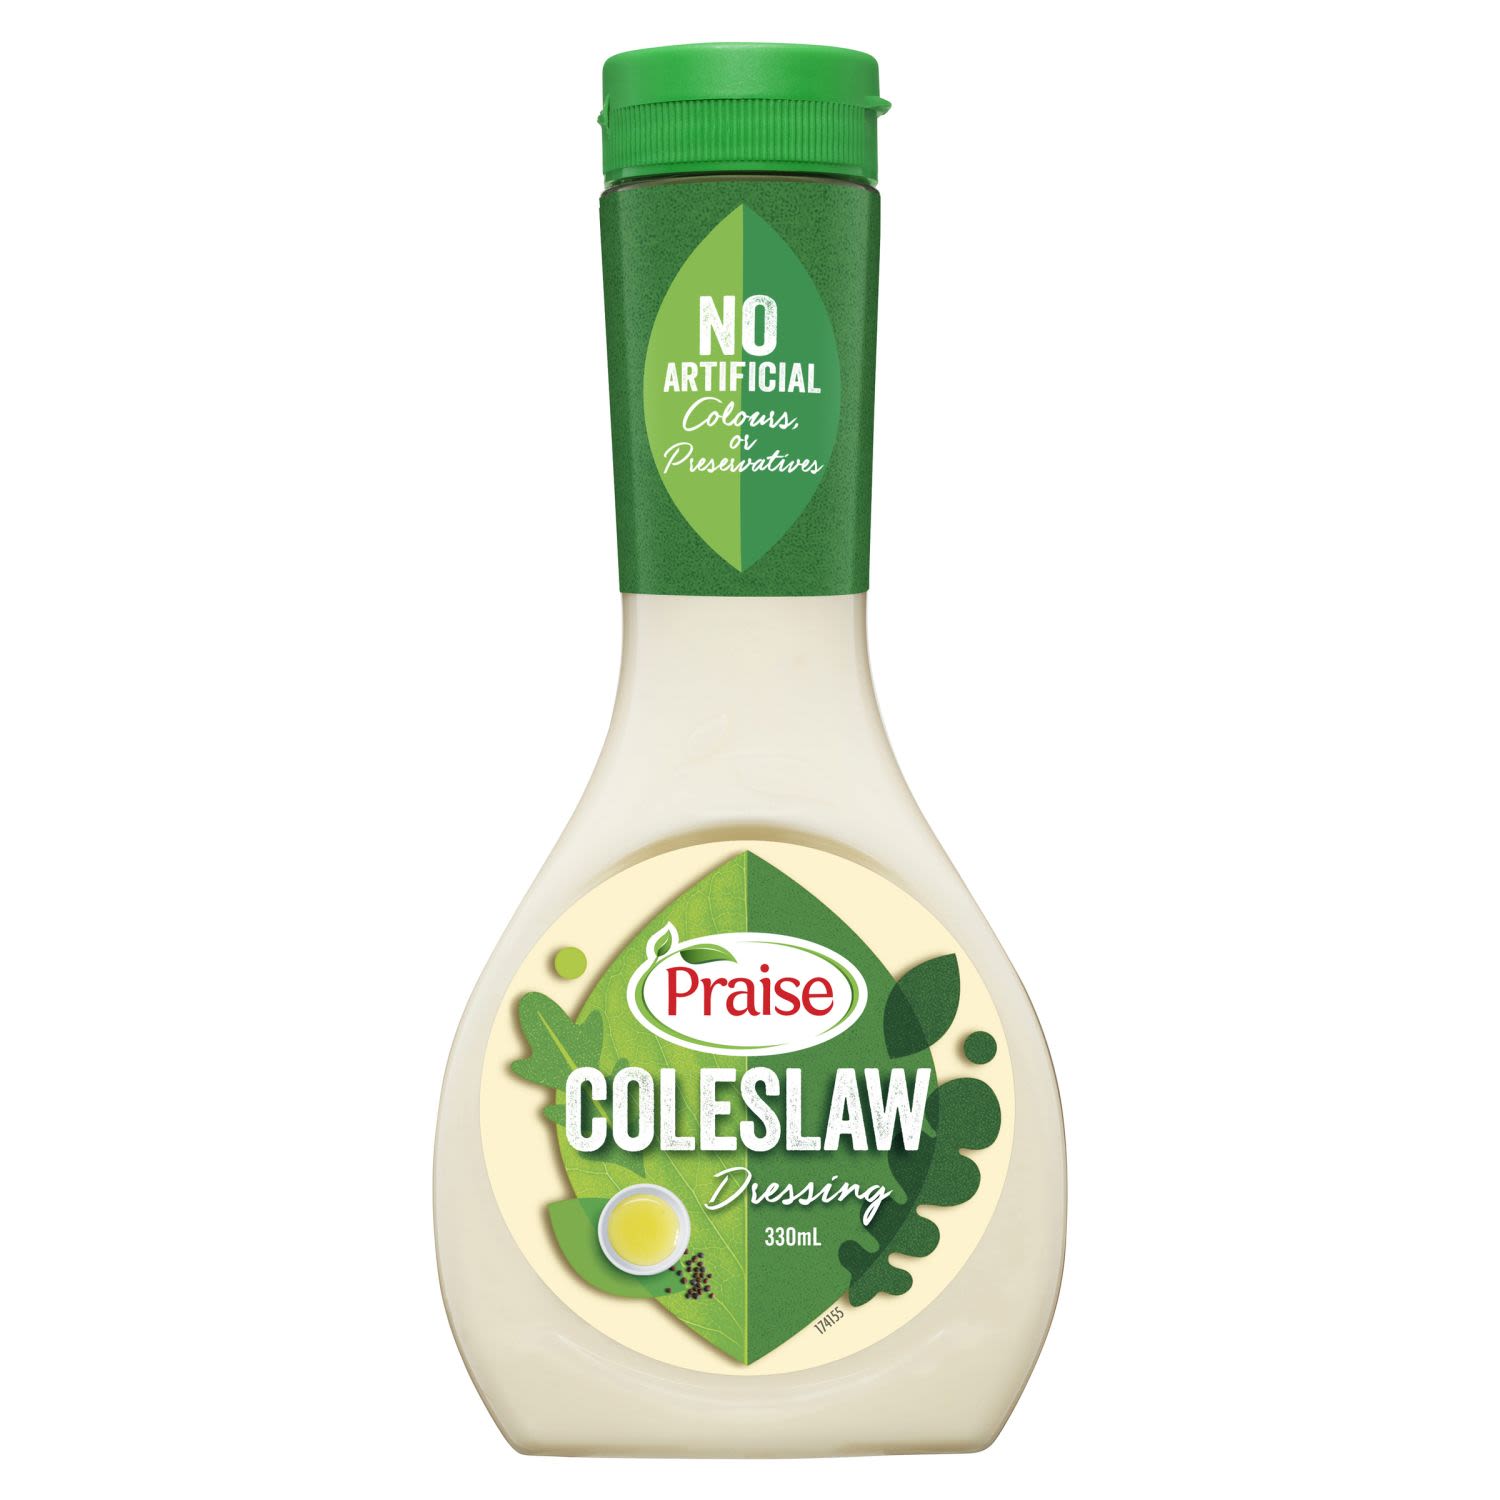 Make your coleslaw more exciting with Praise Coleslaw Dressing. it's super easy to prepare, simply drizzle through your salad and enjoy. This dressing is made from at least 55% Australian ingredients, and is free from artificial colours or preservatives.<br /> <br /><br />Allergen may be present: Egg| Soy <br /><br />Country of Origin: Made in Australia from at least 55% Australian ingredients.